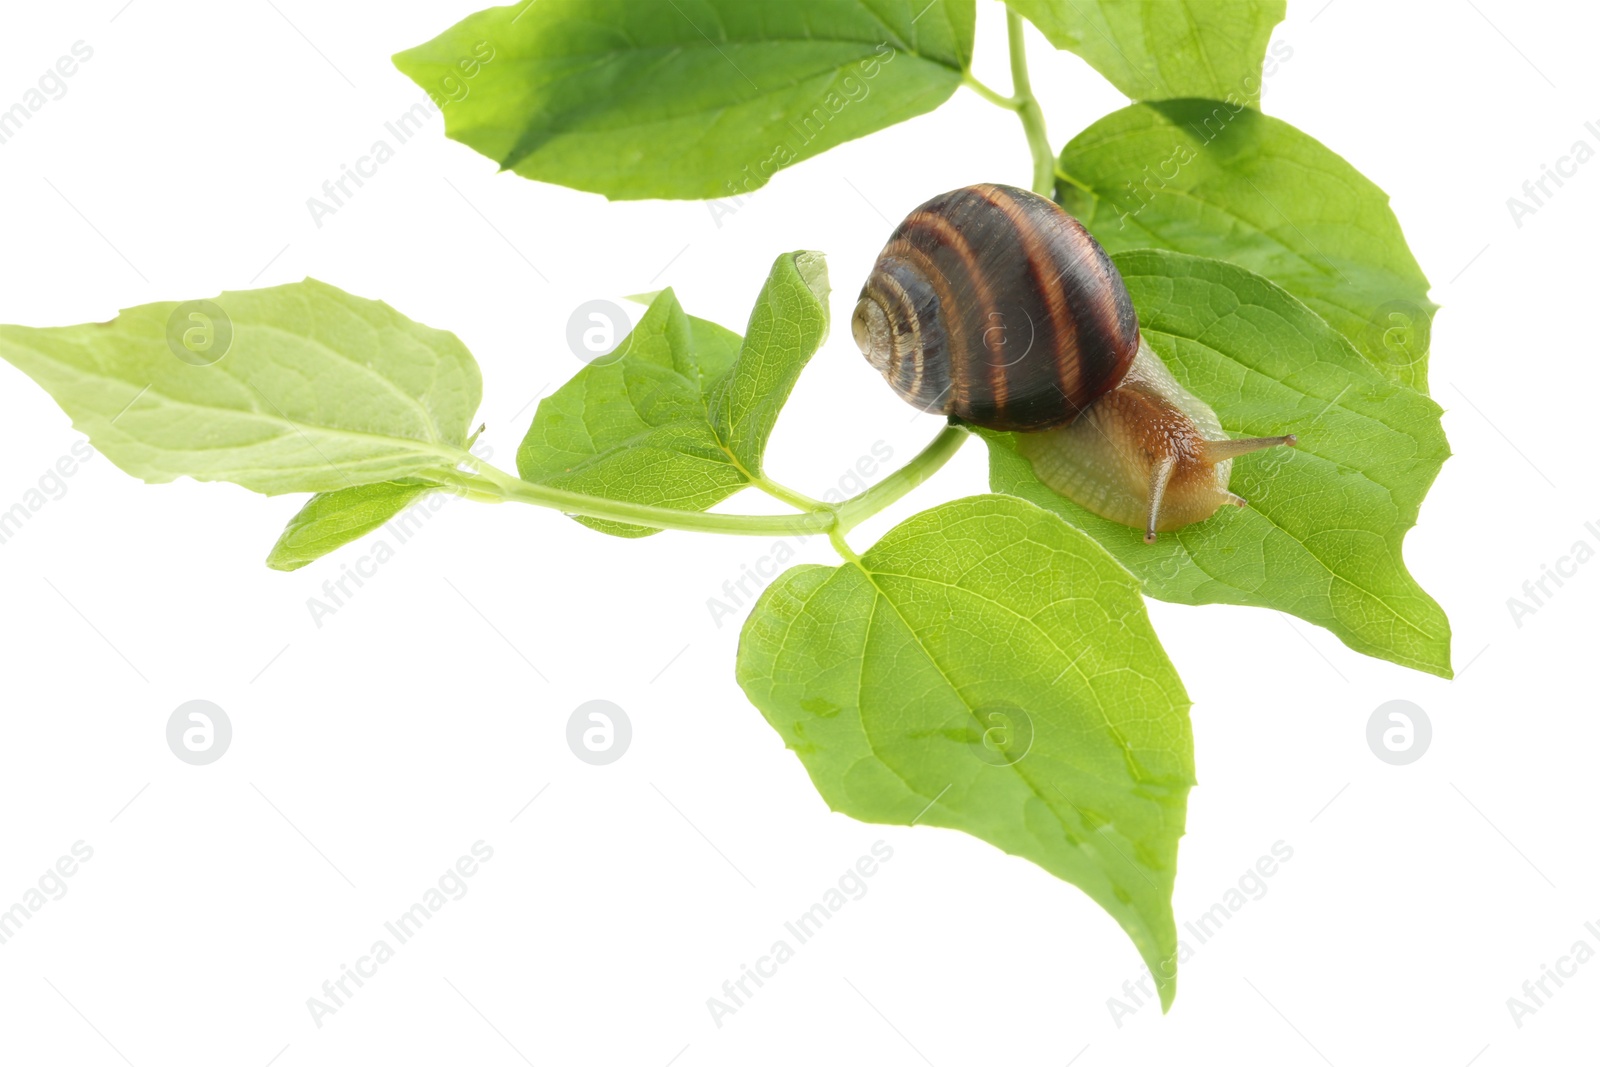 Photo of Common garden snail crawling on green leaves against white background